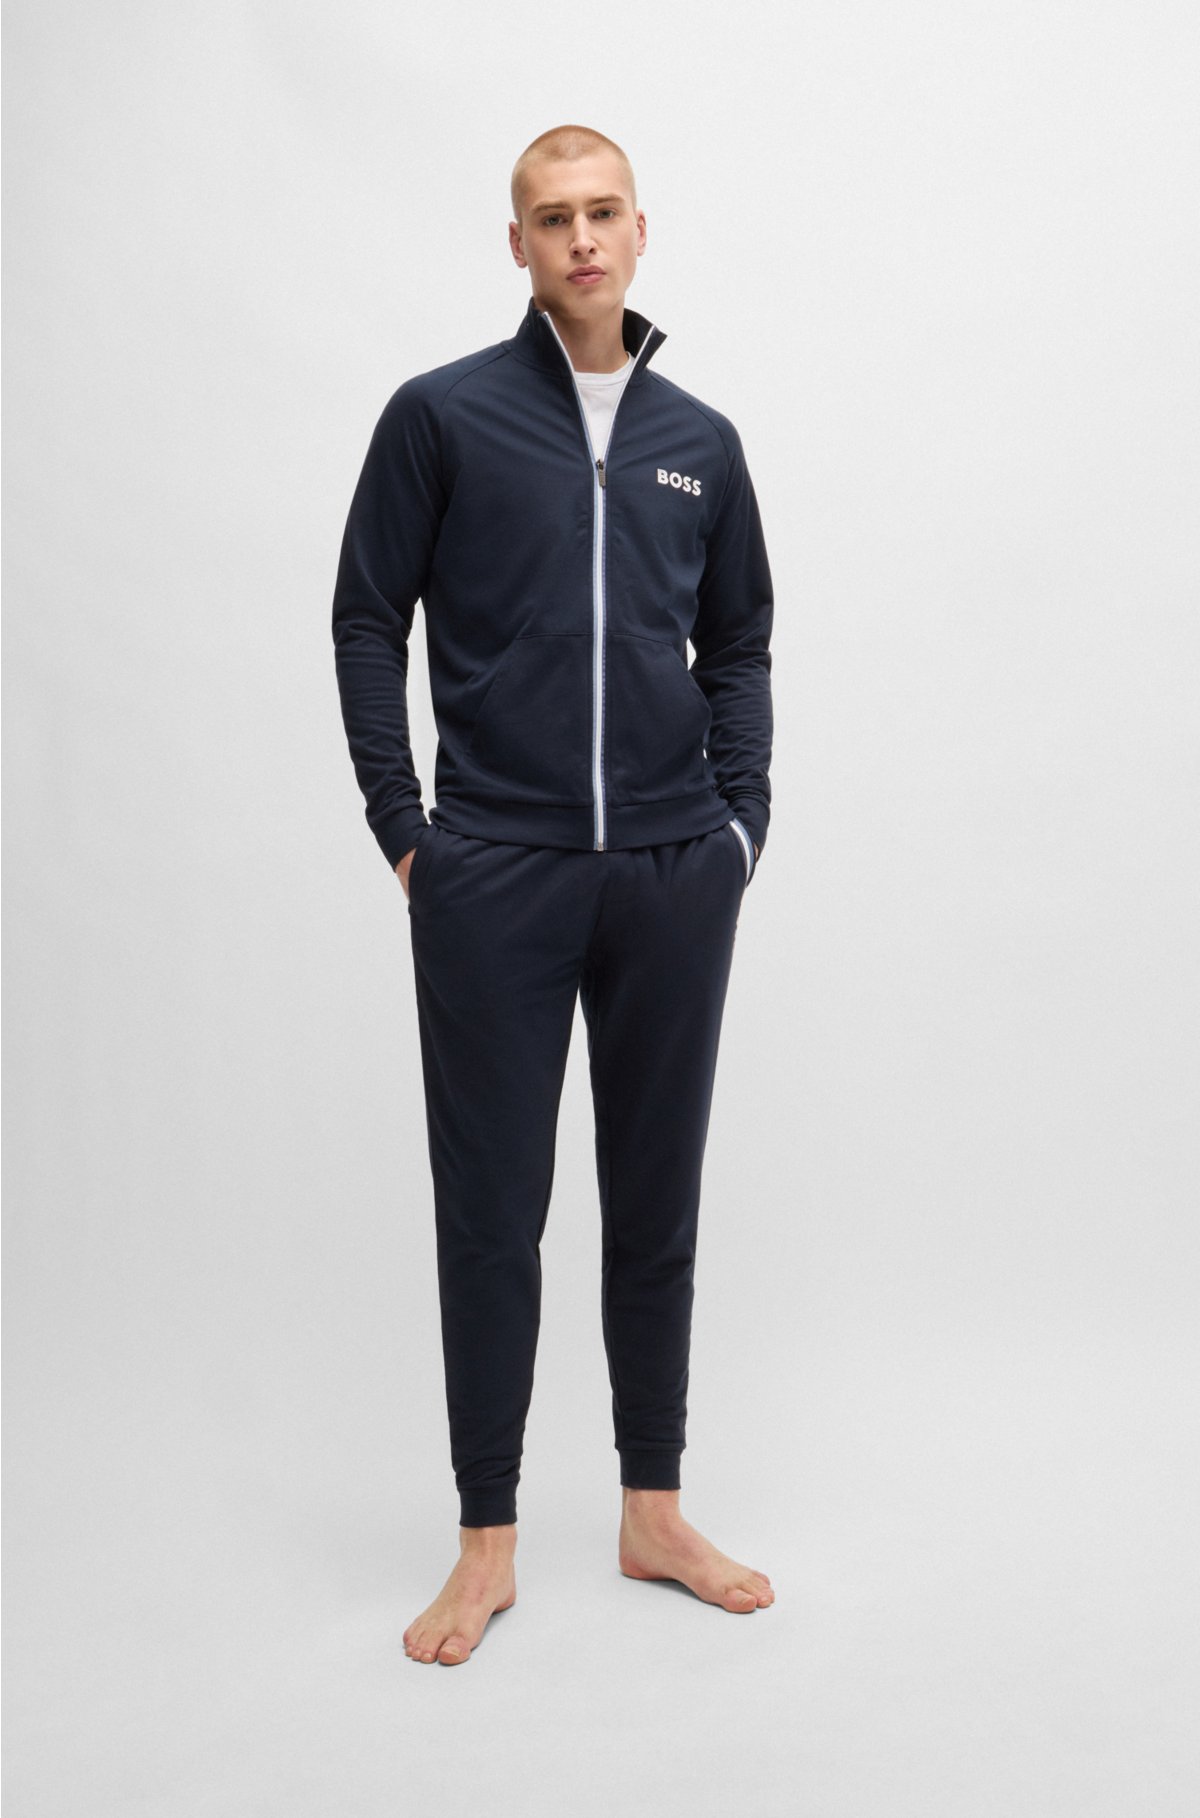 Zip-up jacket in French terry with logo detail, Dark Blue